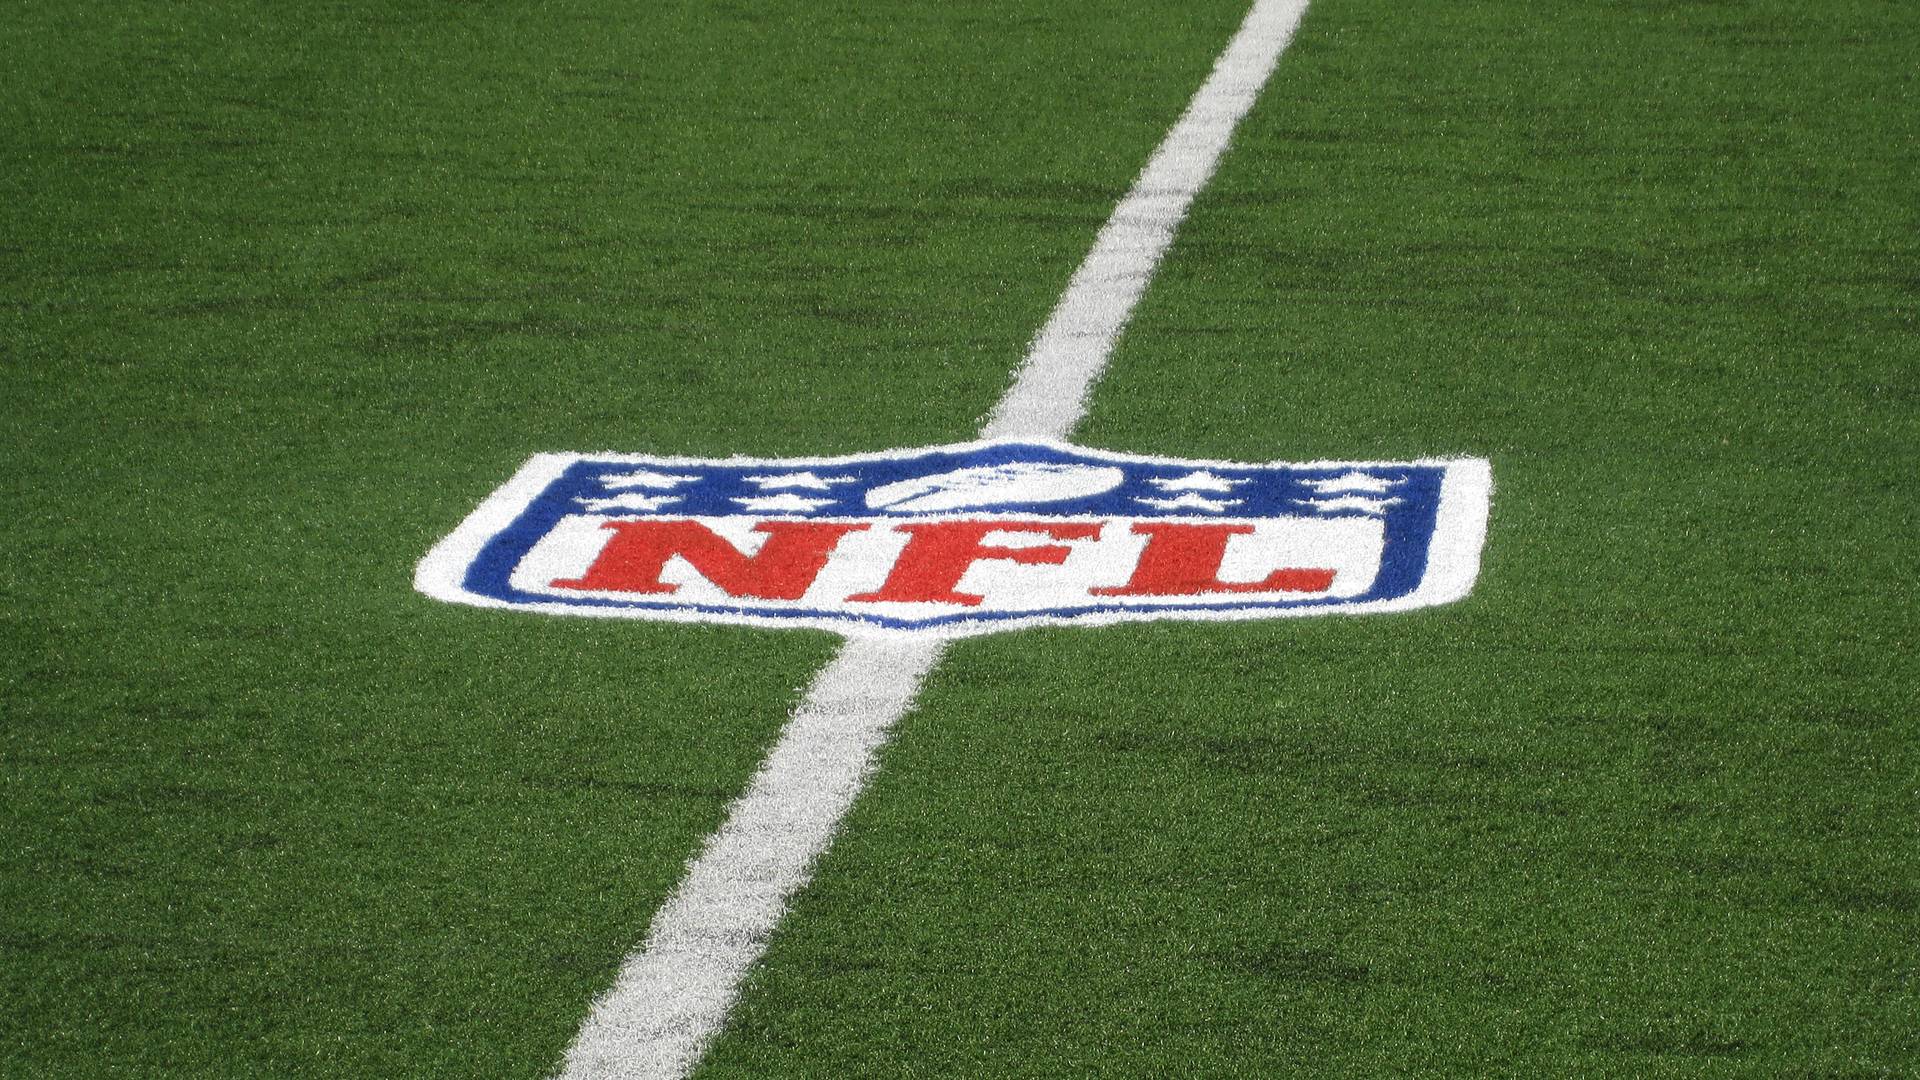 Nfl Football Field Backgrounds Hd Image 3 HD Wallpapers